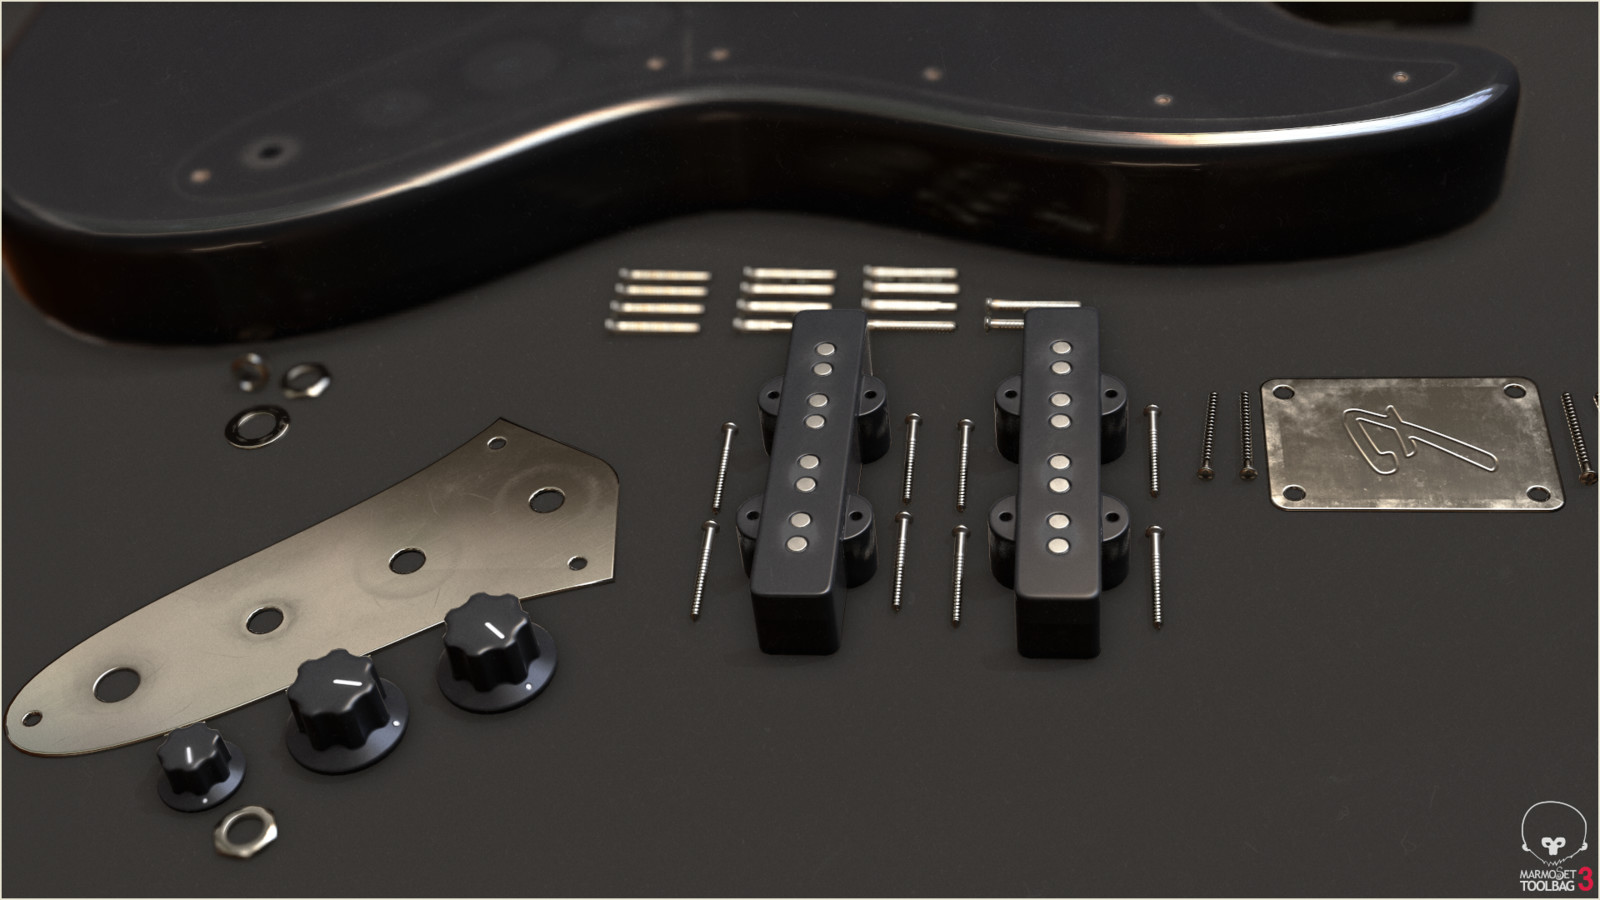 Pickups &amp; Tuning Knobs Disassembled (Low Poly)